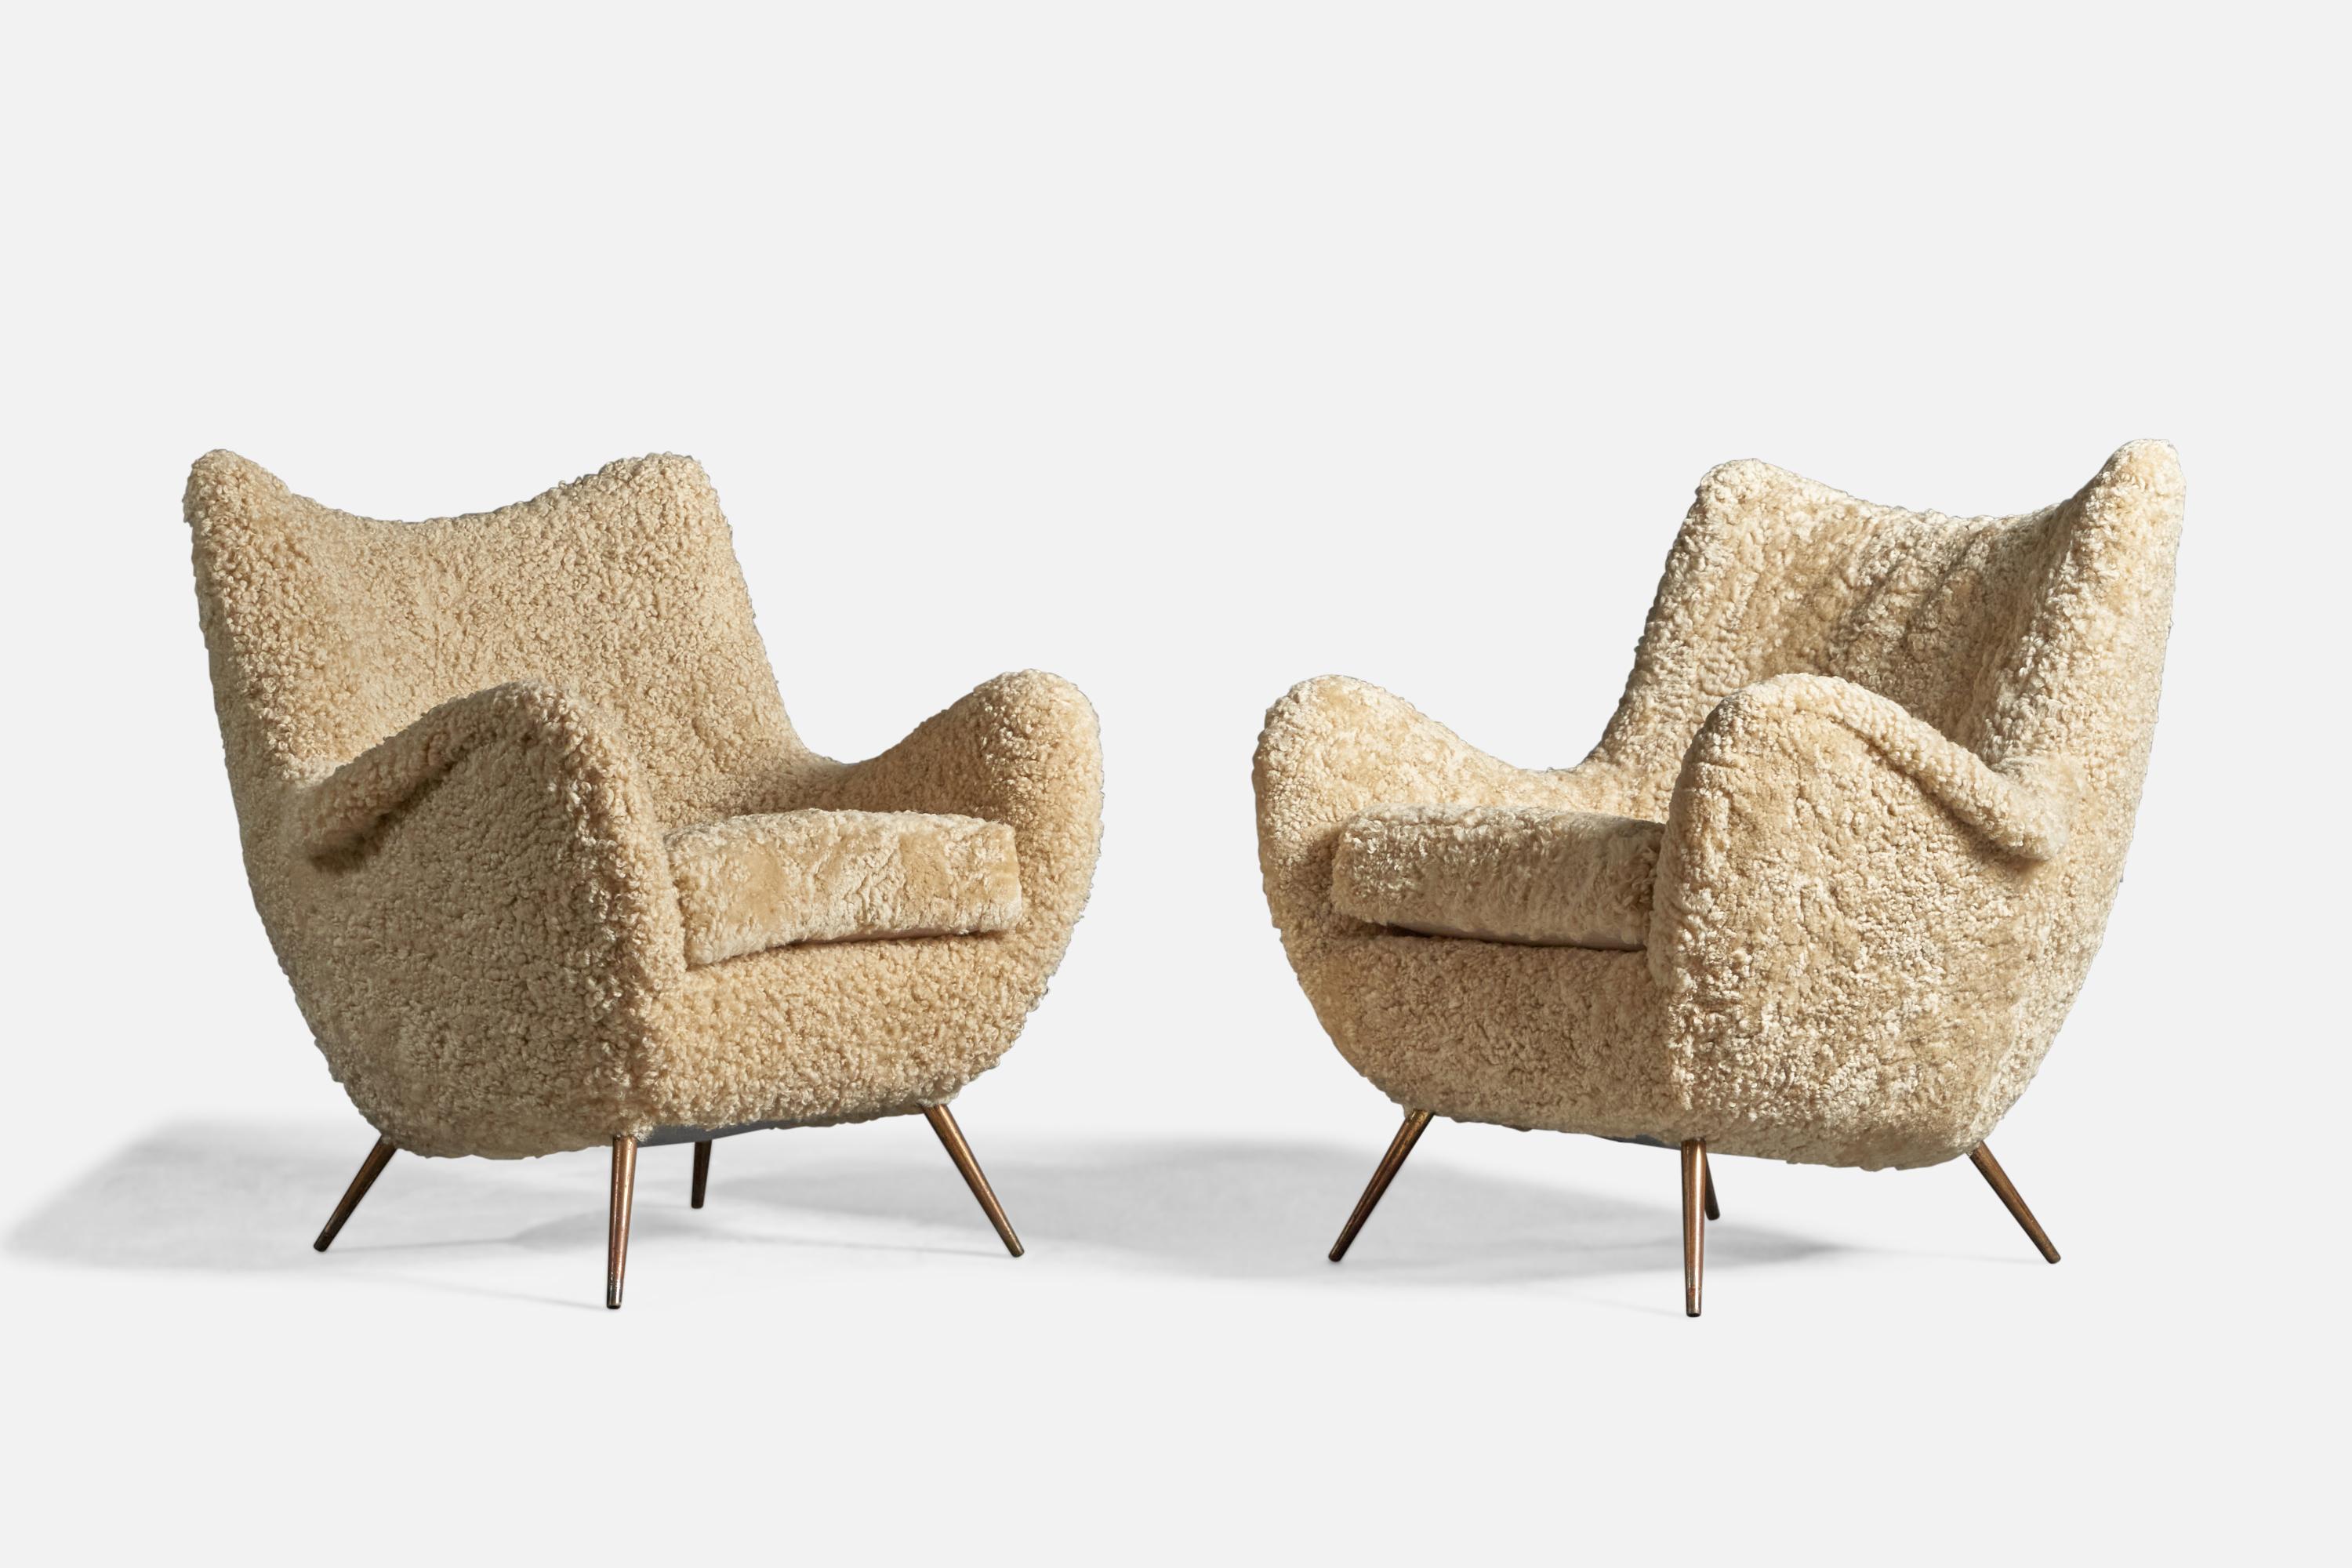 A pair of beige shearling and brass lounge chairs, designed and produced in Italy, 1950s

18